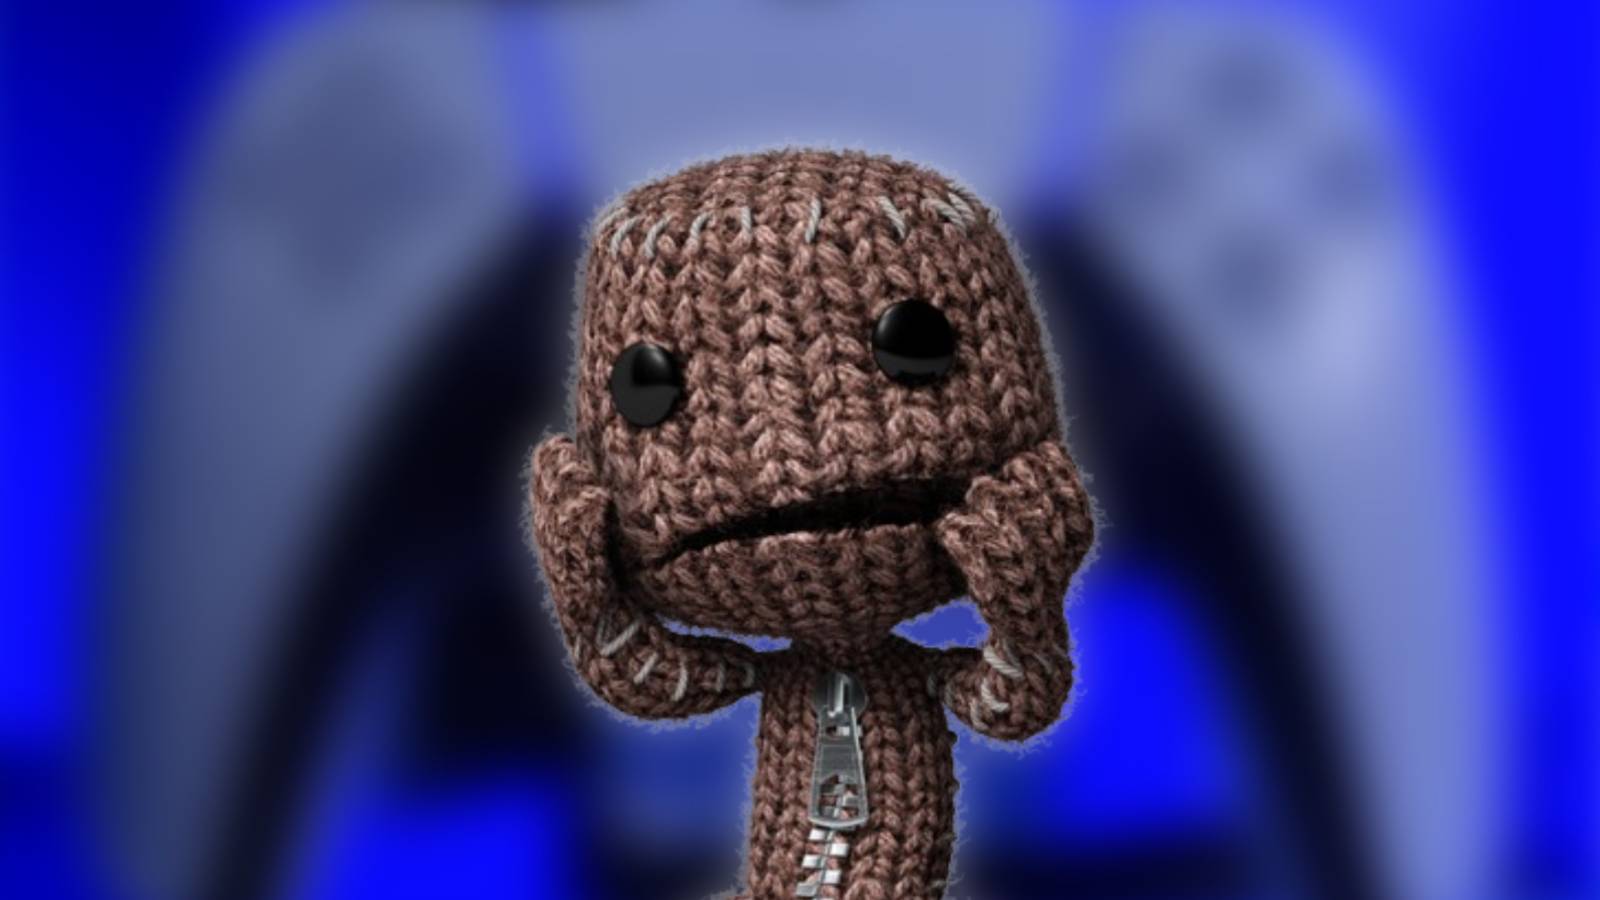 Unsplash photo of a DualSense controller by Tamara Bitter, with Sackboy from Sackboy: A Big Adventure looking confused in front.